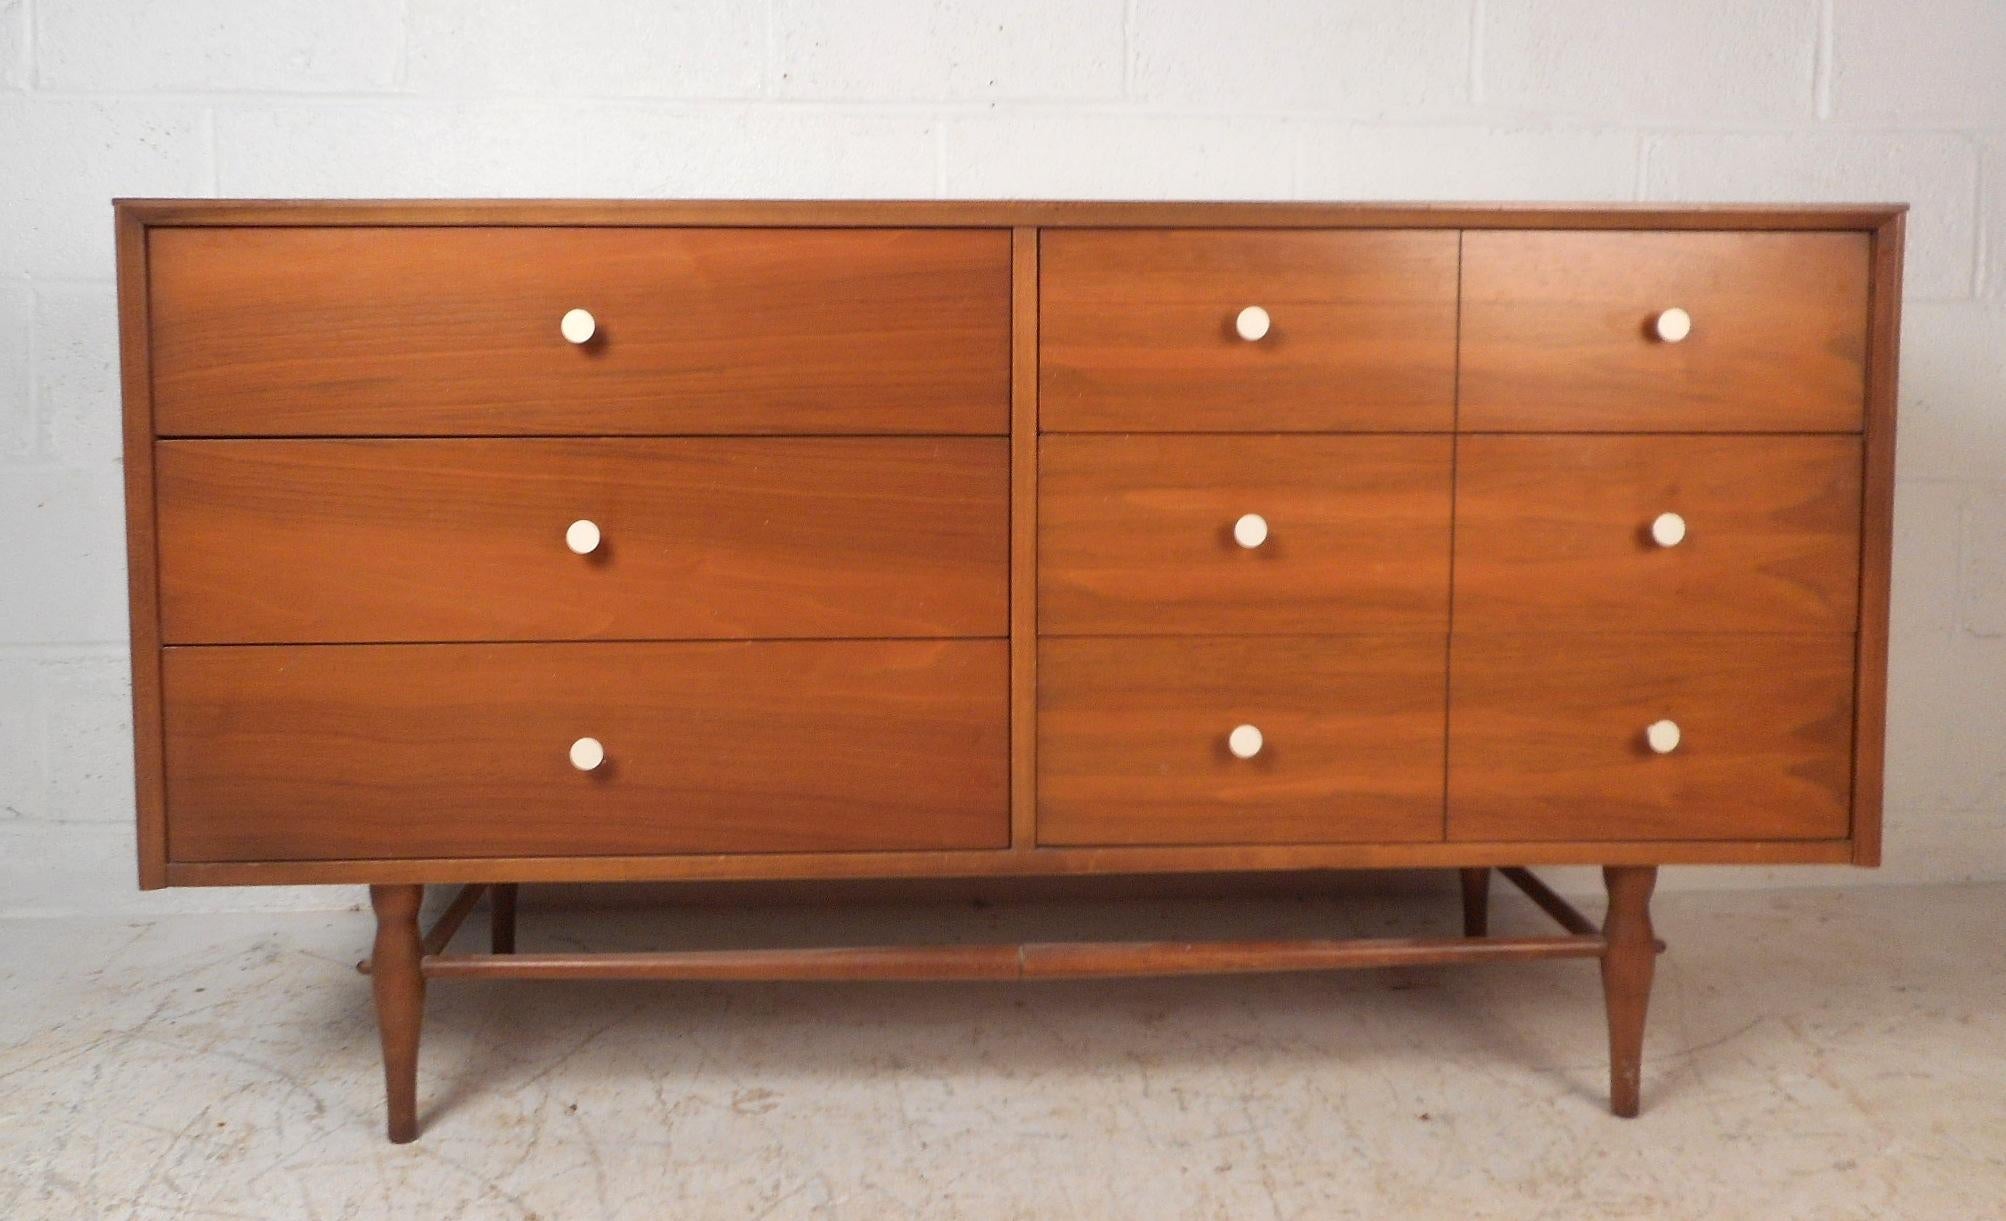 This gorgeous vintage modern dresser features six hefty drawers ensuring plenty of room for storage. A petite straight line design with sculpted and tapered legs adding to the midcentury appeal. Unique circular white metal drawer pulls and an